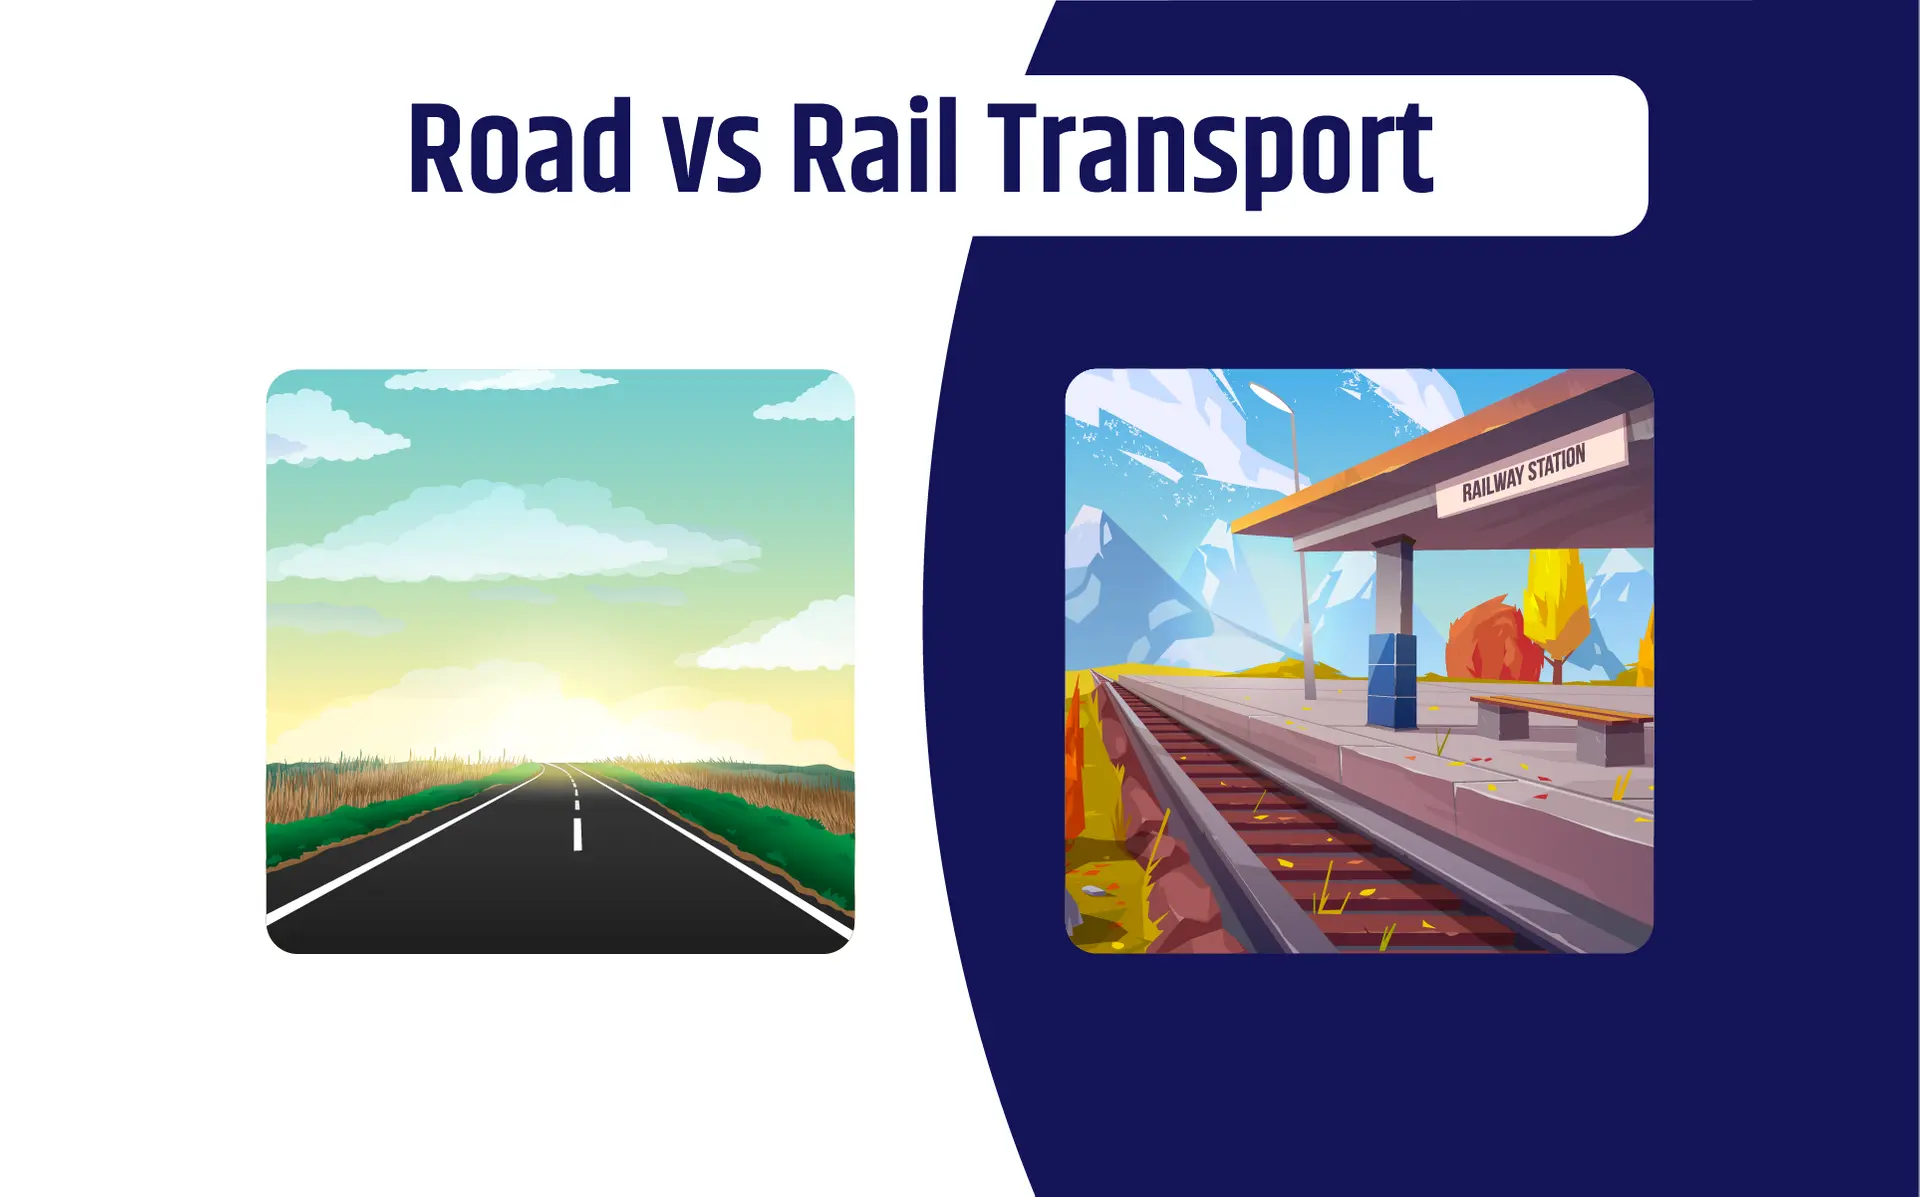 India’s Road Transport System